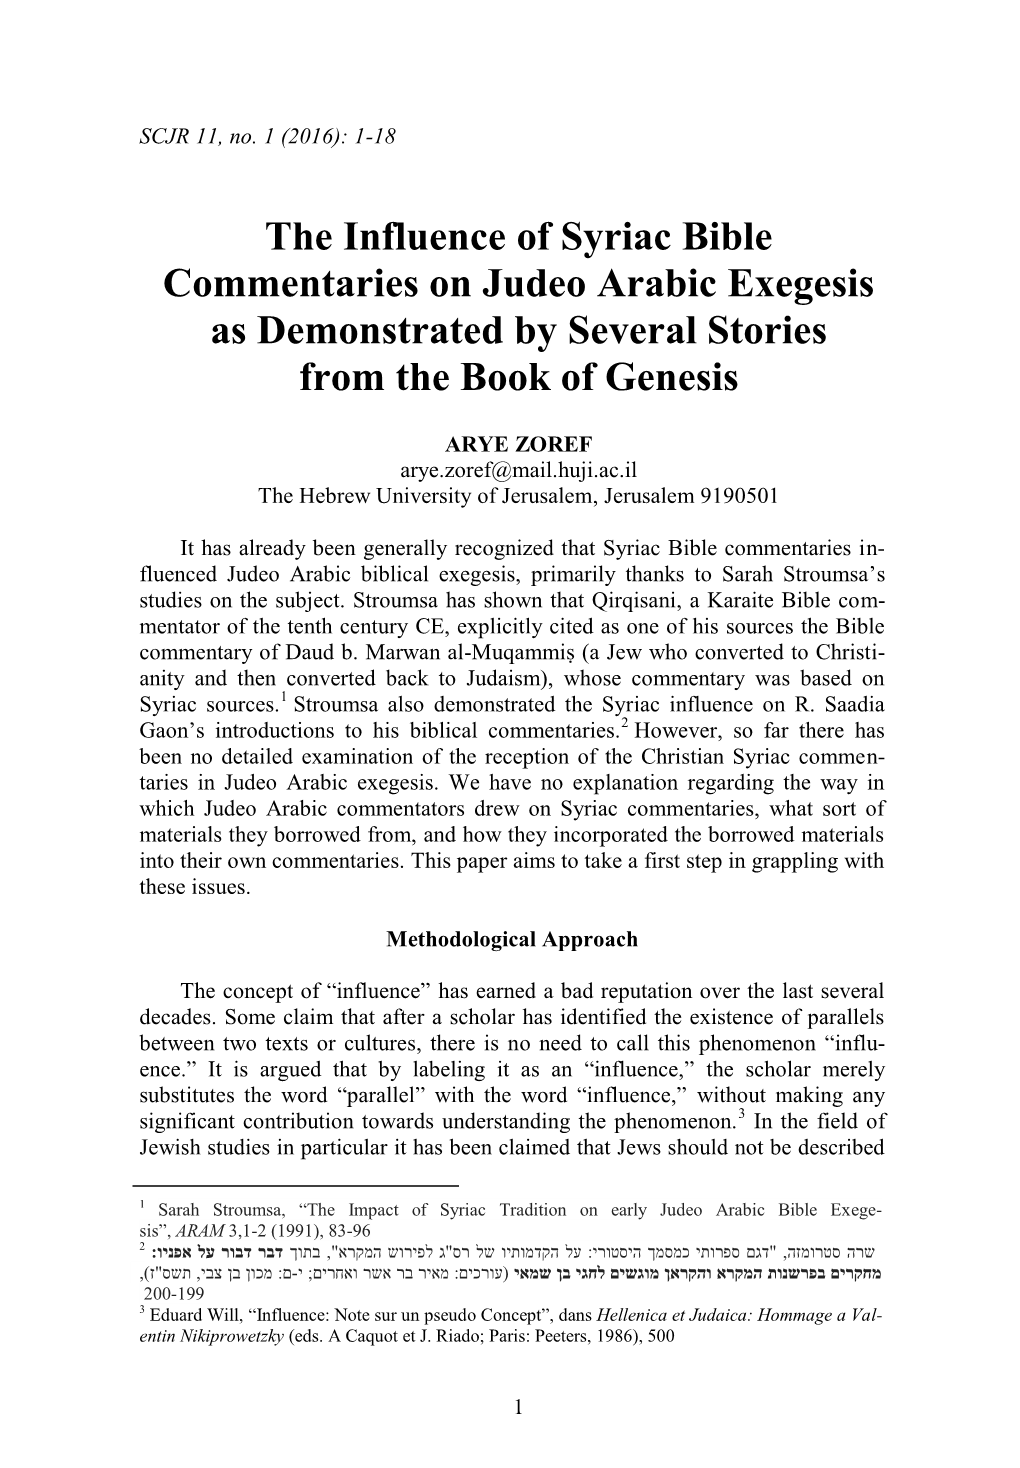 The Influence of Syriac Bible Commentaries on Judeo Arabic Exegesis As Demonstrated by Several Stories from the Book of Genesis